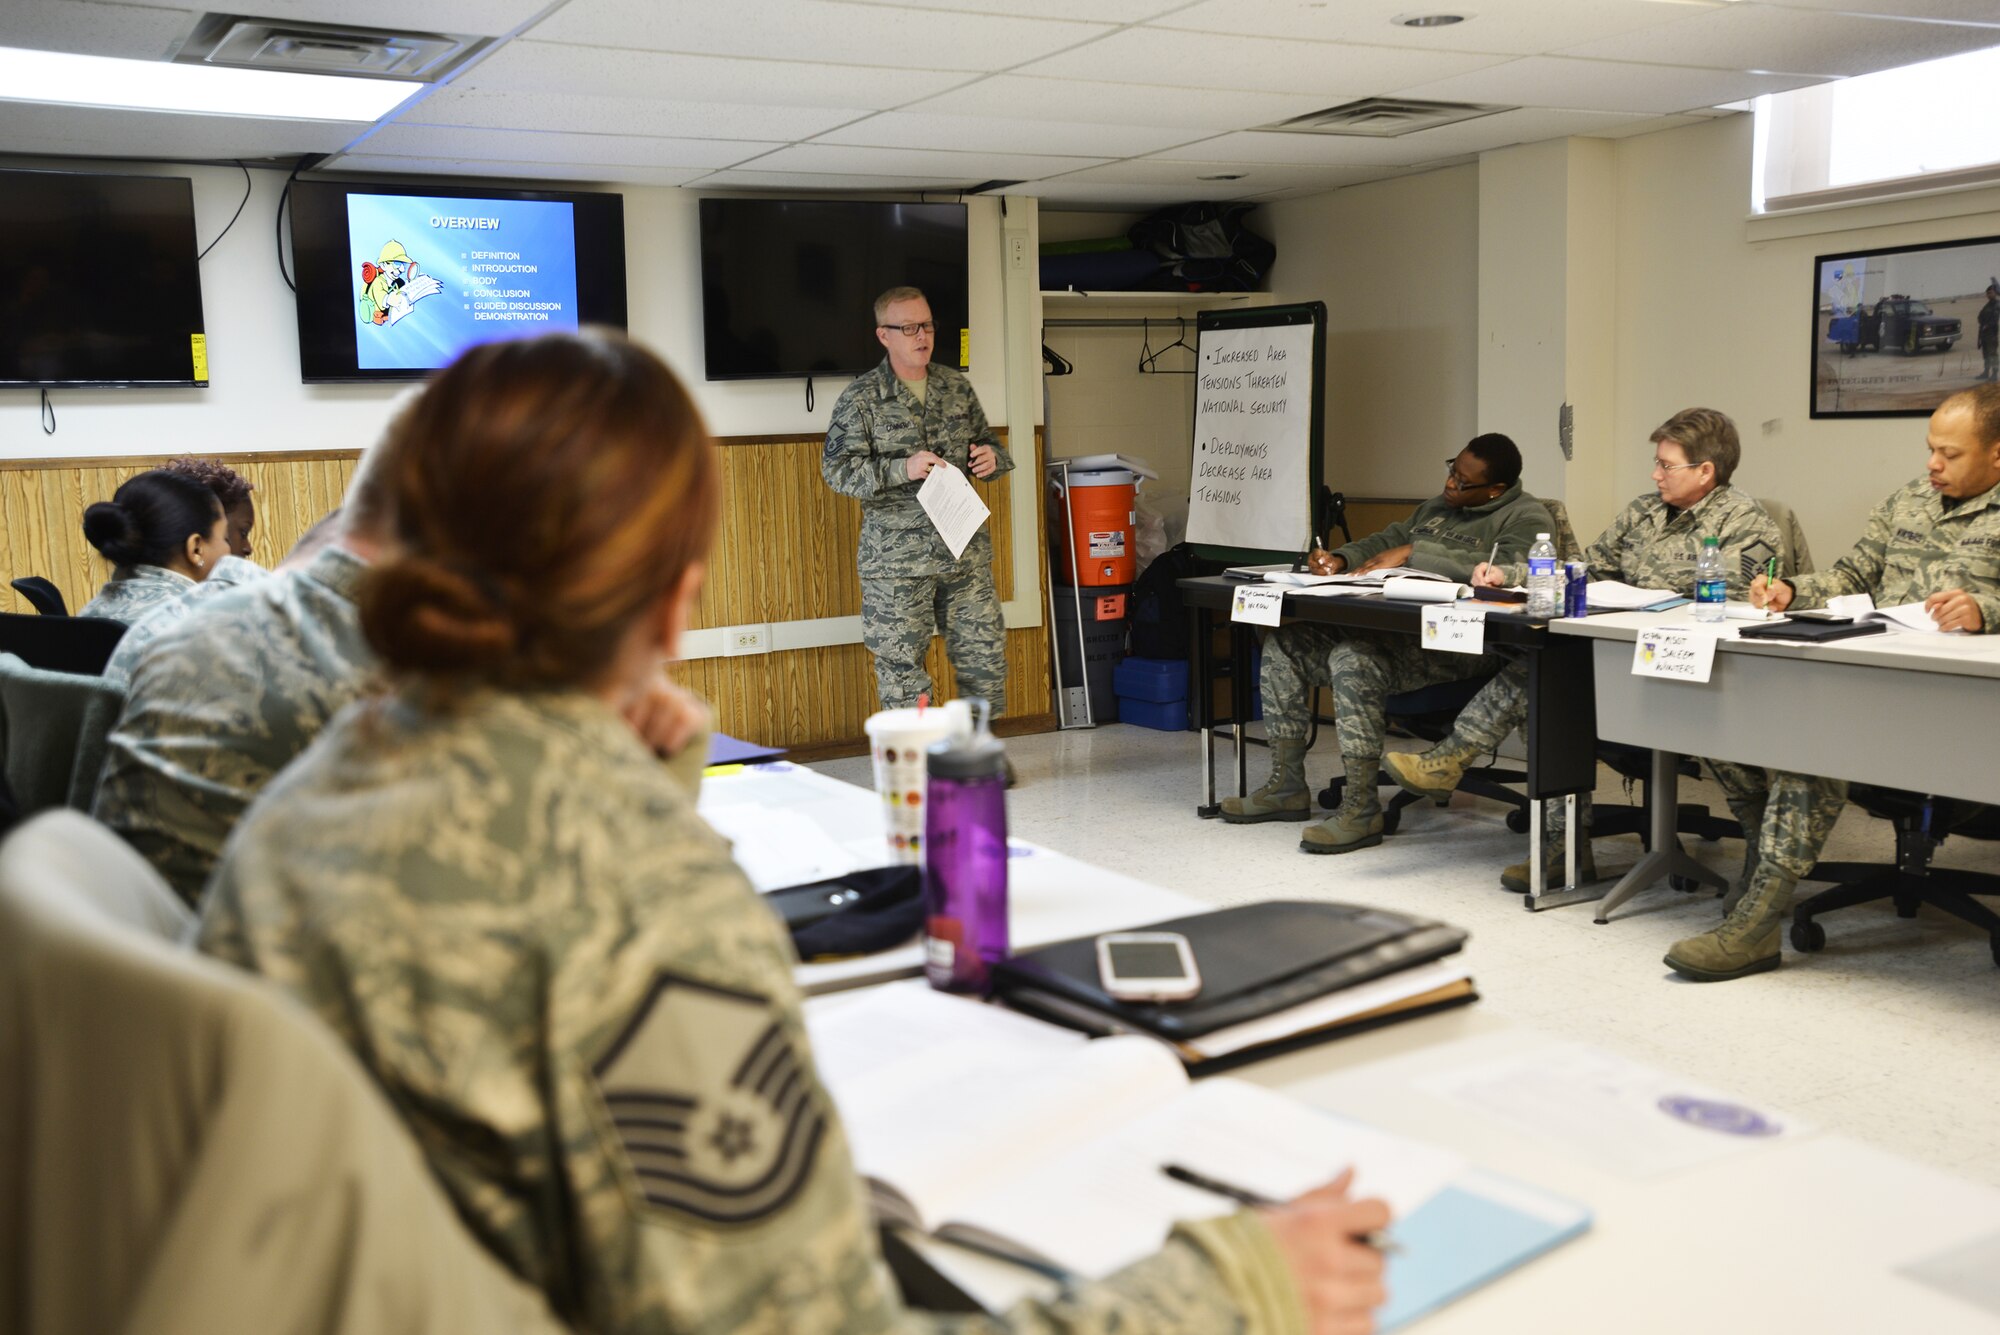 The 107th Airlift Wing hosted an Instructor Certification Program (ICP) here this past week with 16 New York Air National Guardsmen attending in order to become facilitators for Professional Military Education (PME) courses. Master Sgt. William Conner from Knoxville, Tennessee is one of the instructors for this course.  Mar. 3, 2015. (U.S. Air National Guard Photo/ Tech Sgt. Brandy Fowler)